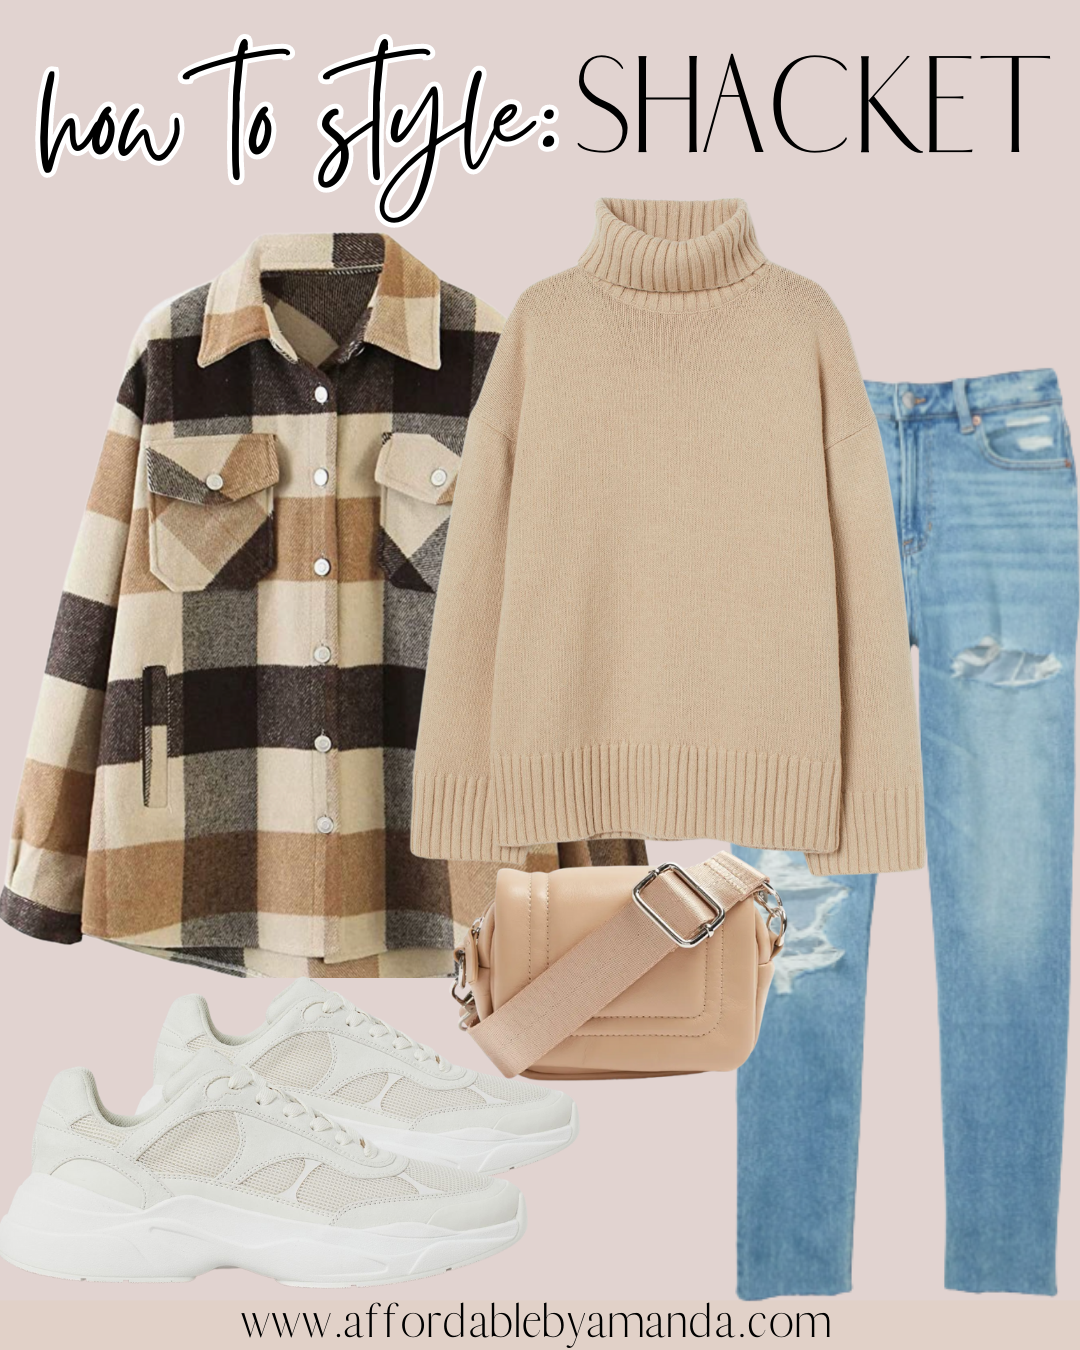 Best Shackets and How to Style Them - Affordable by Amanda